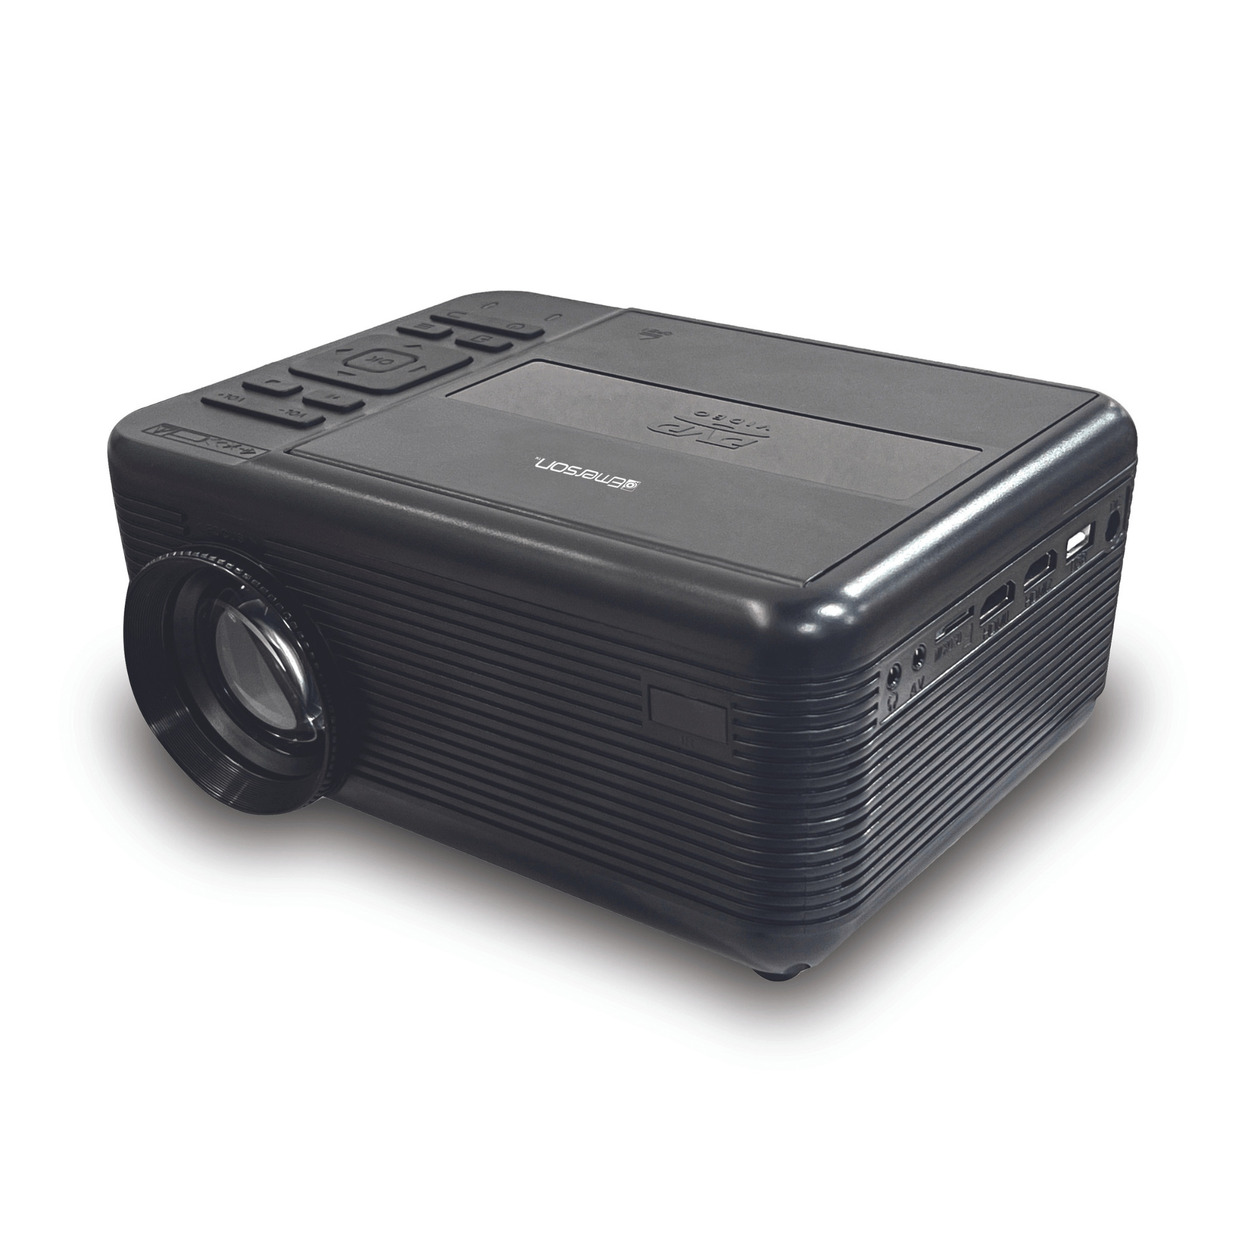 Emerson 150 Home Theater LCD Projector With 720p And DVD Player